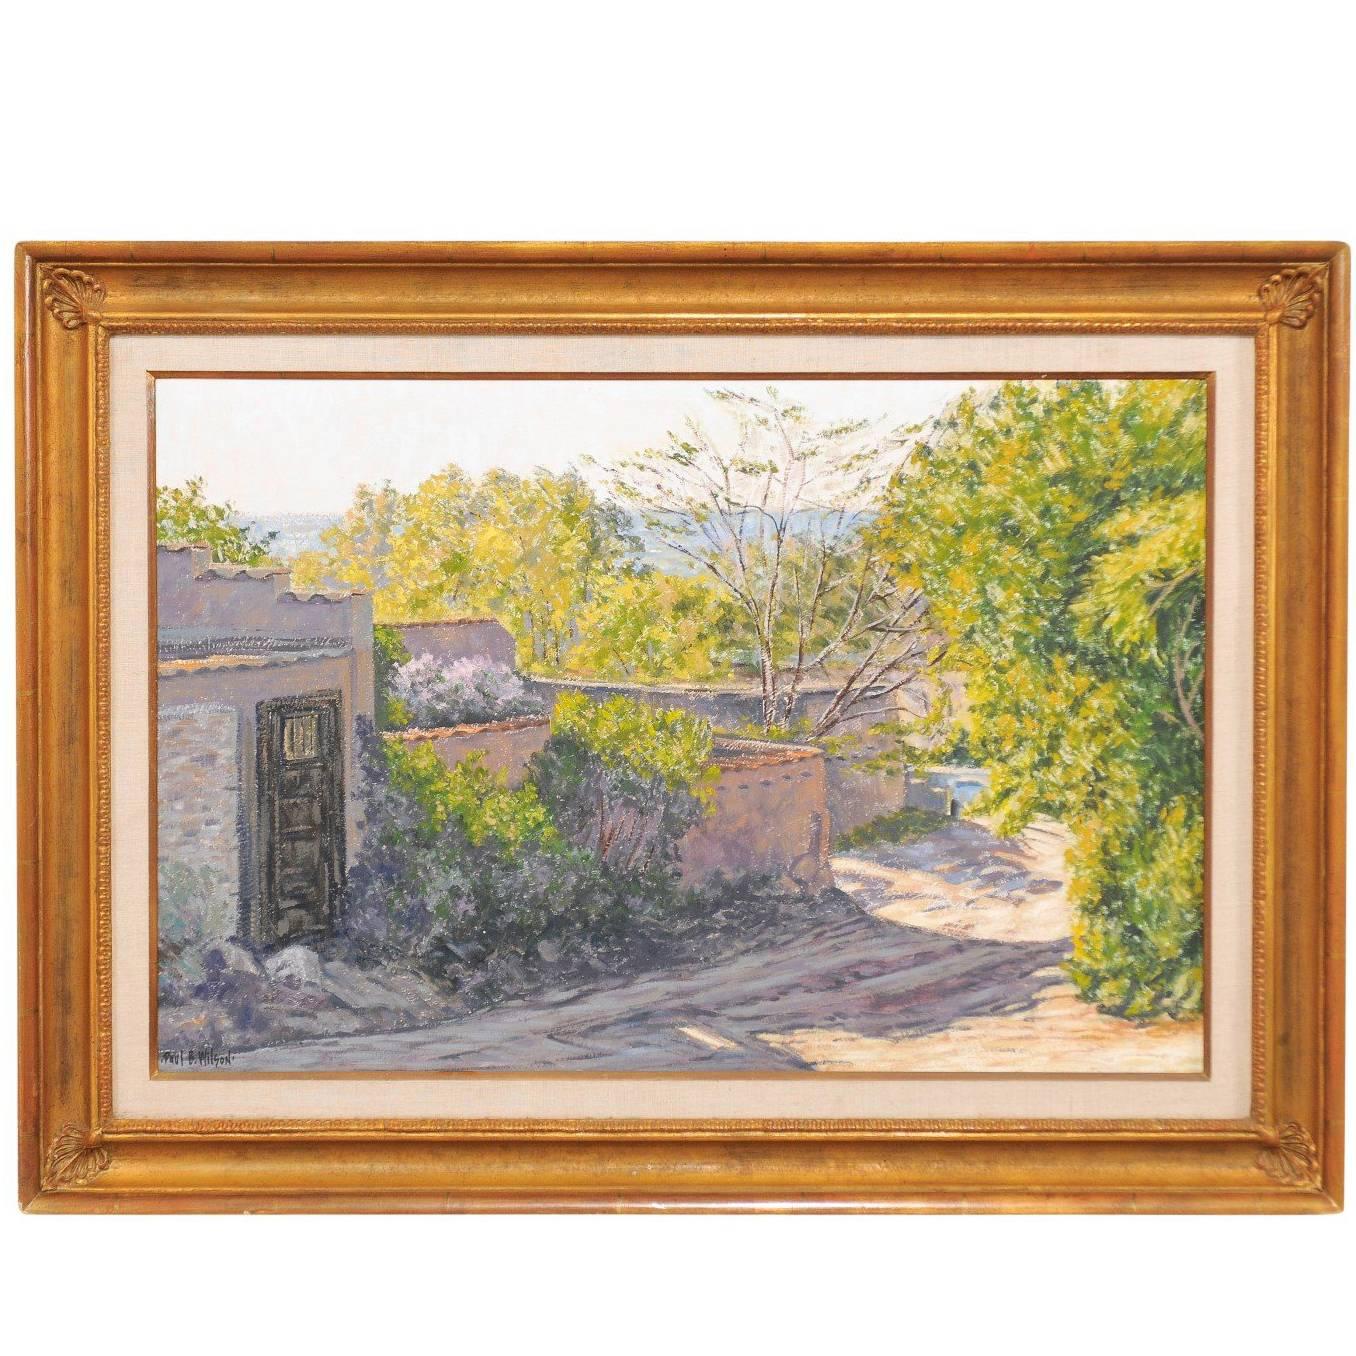 Home and Landscape Framed Oil Painting of Santa Fe, New Mexico of Medium Size